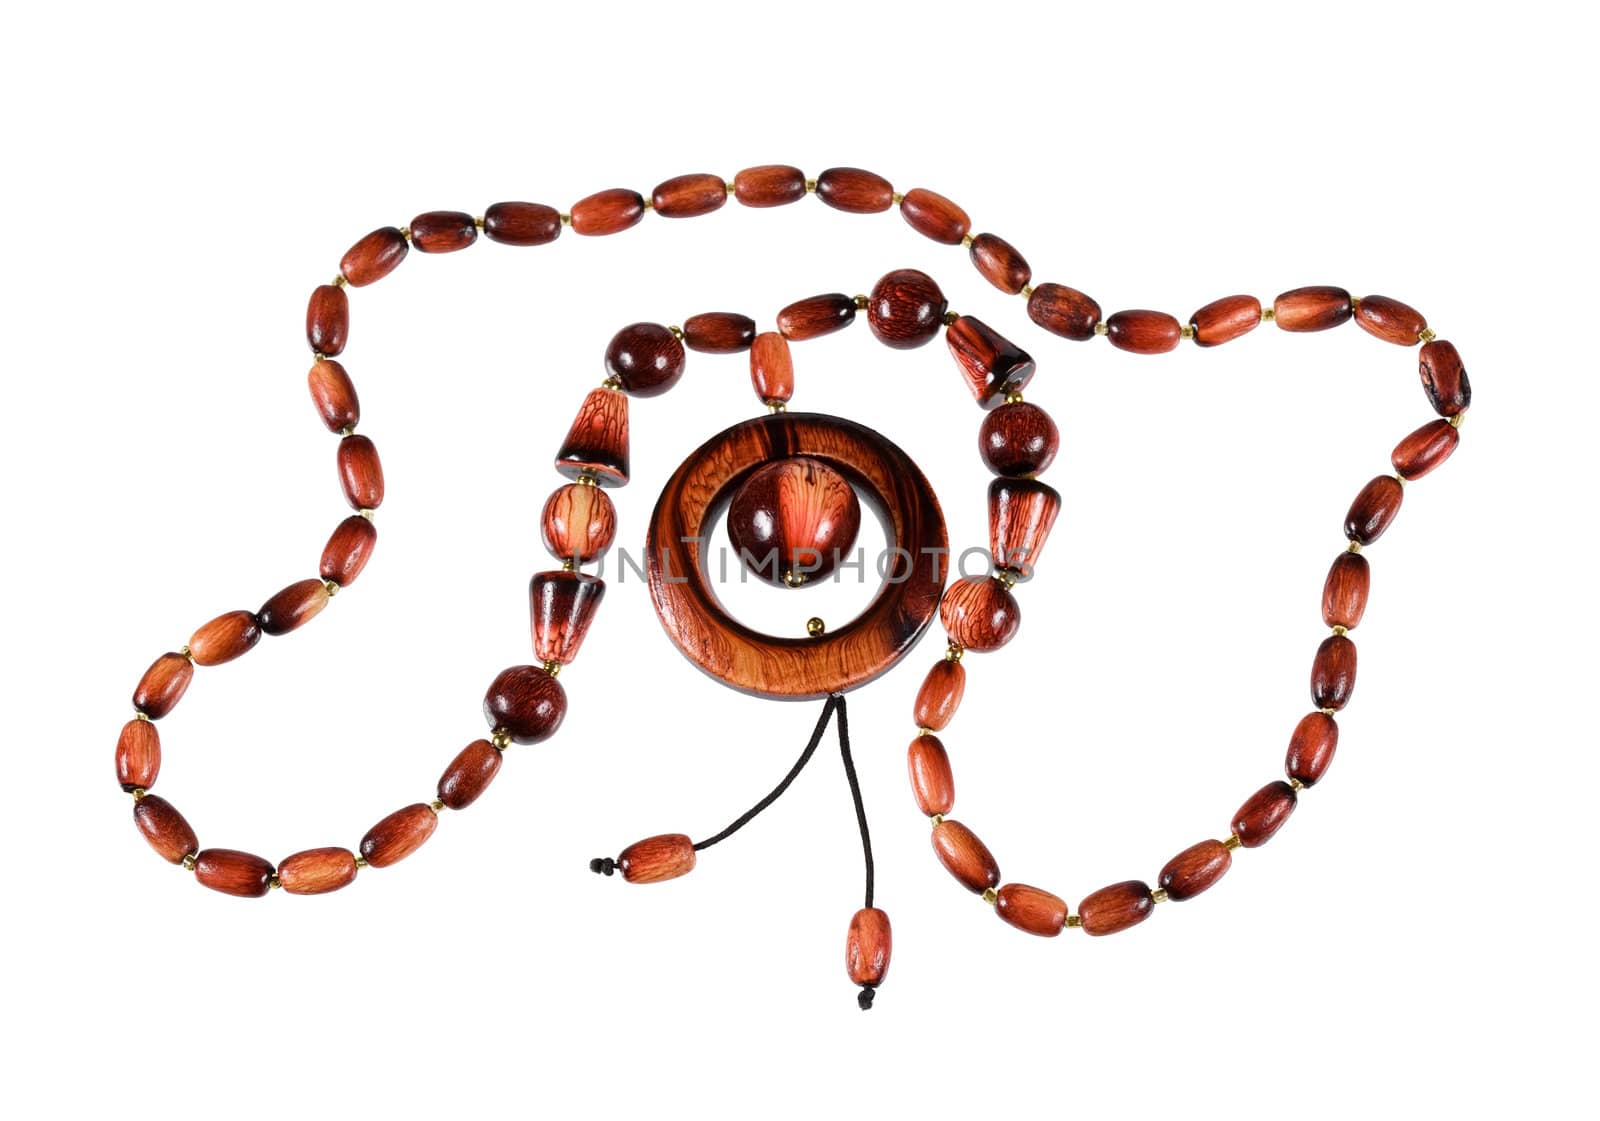 A necklace of wooden figures of red-brown color, isolated on white background